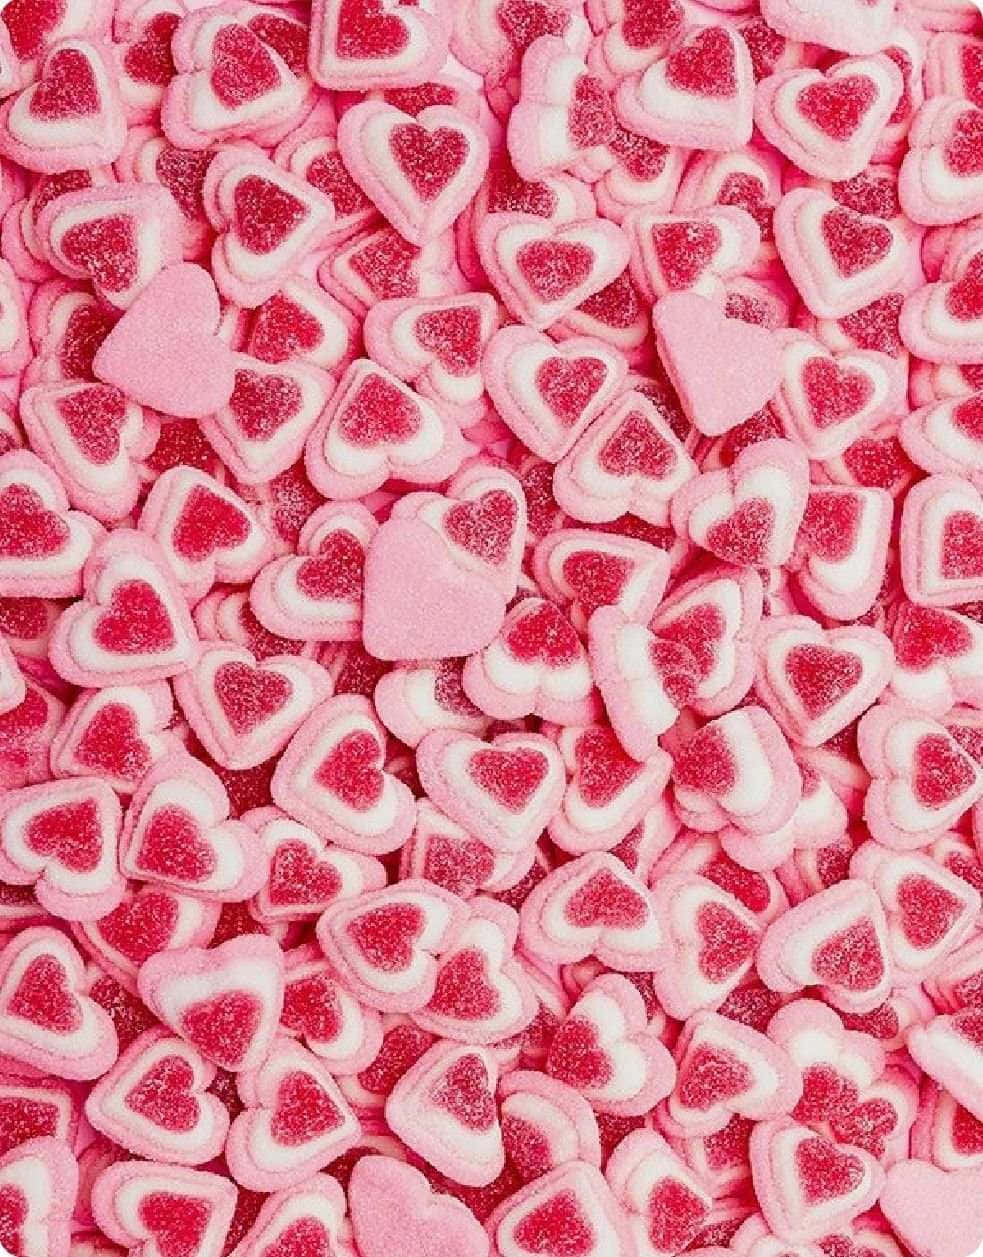 Pink Heart Candies Lovecore Texture Background